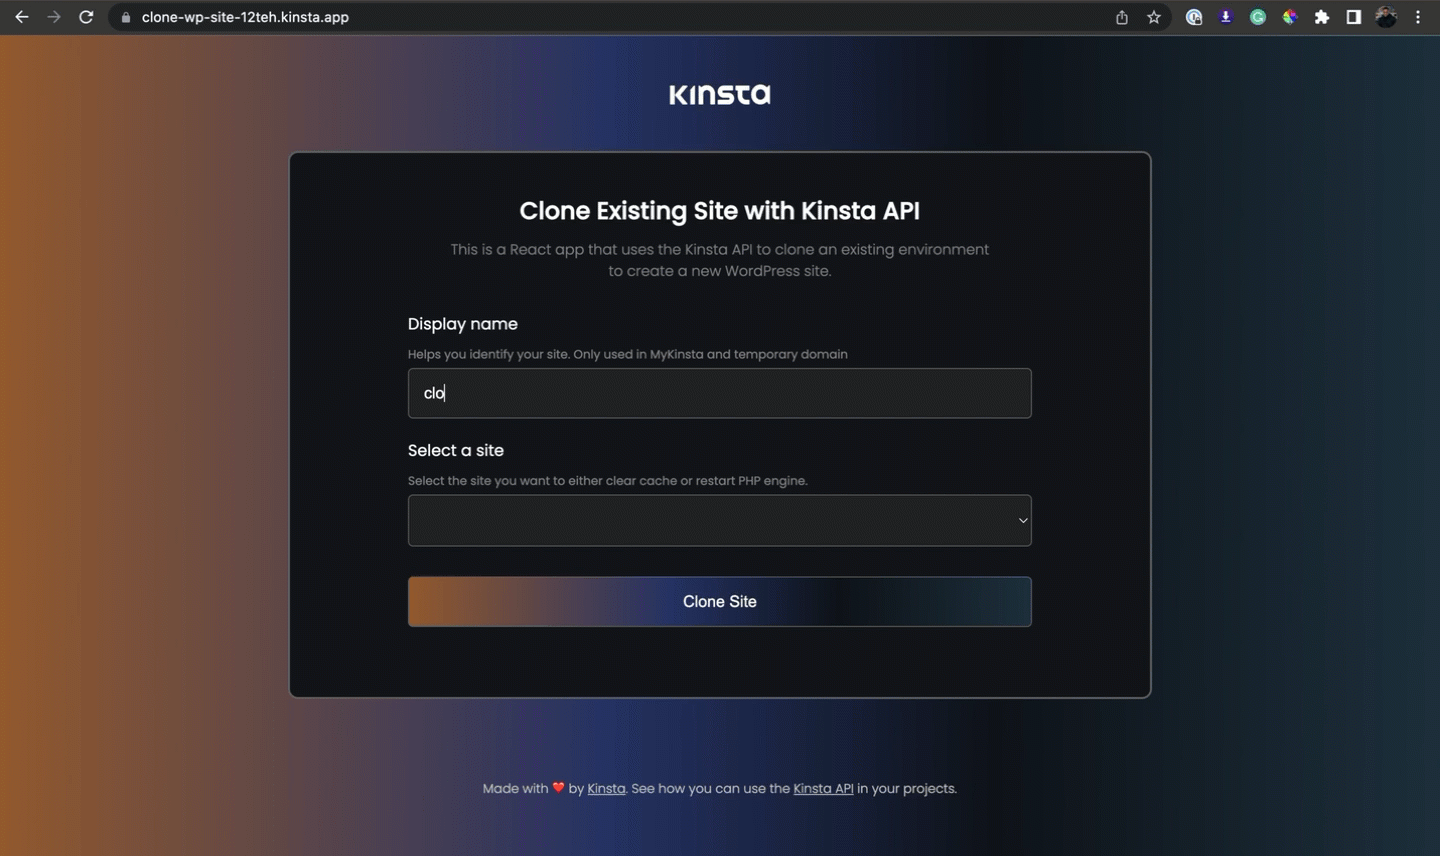 React application for cloning site with Kinsta API